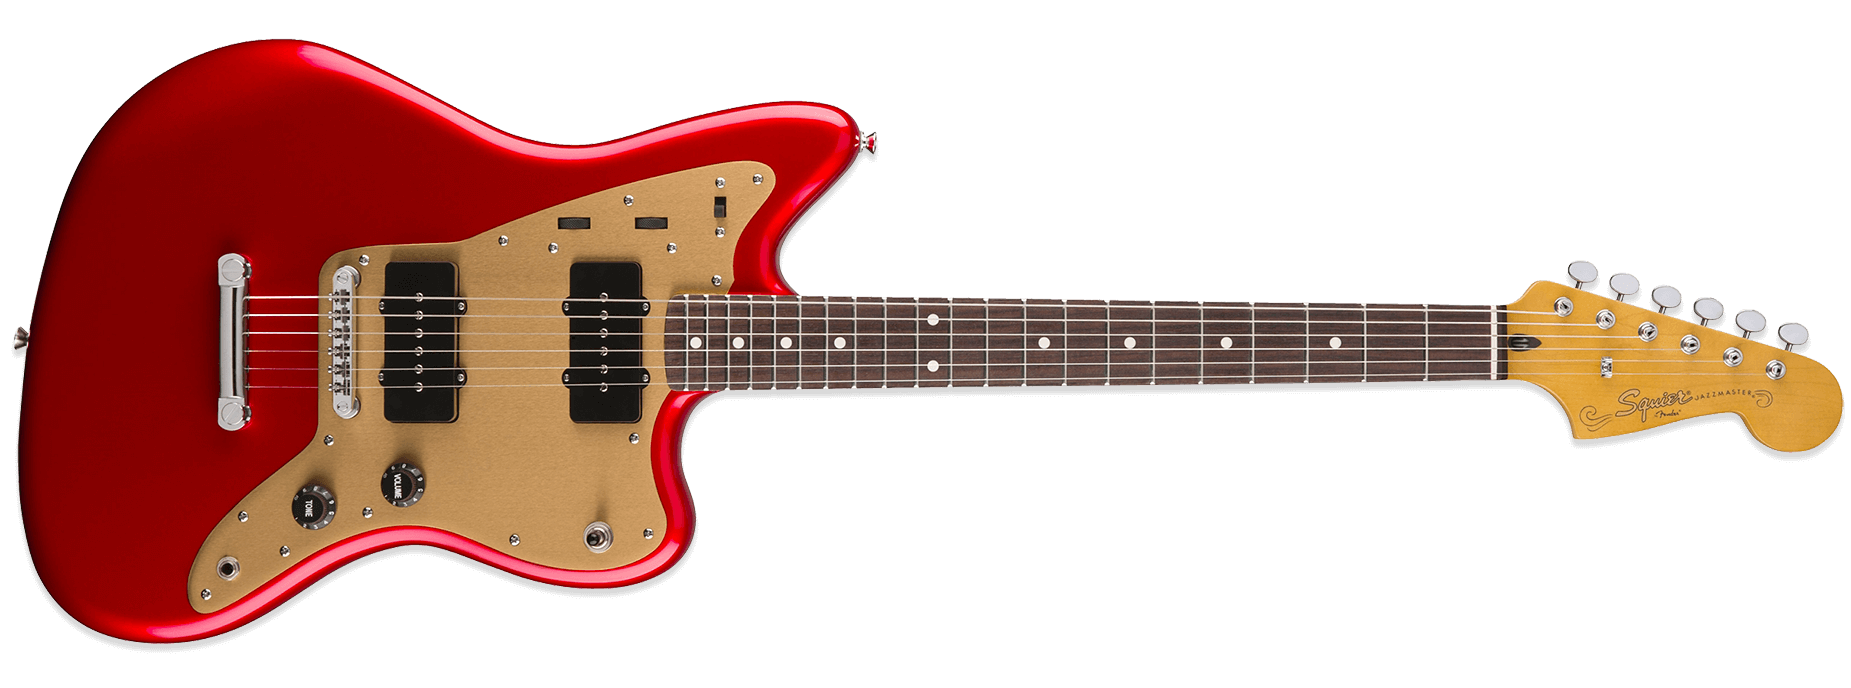 Squier Deluxe Jazzmaster ST Candy Apple Red